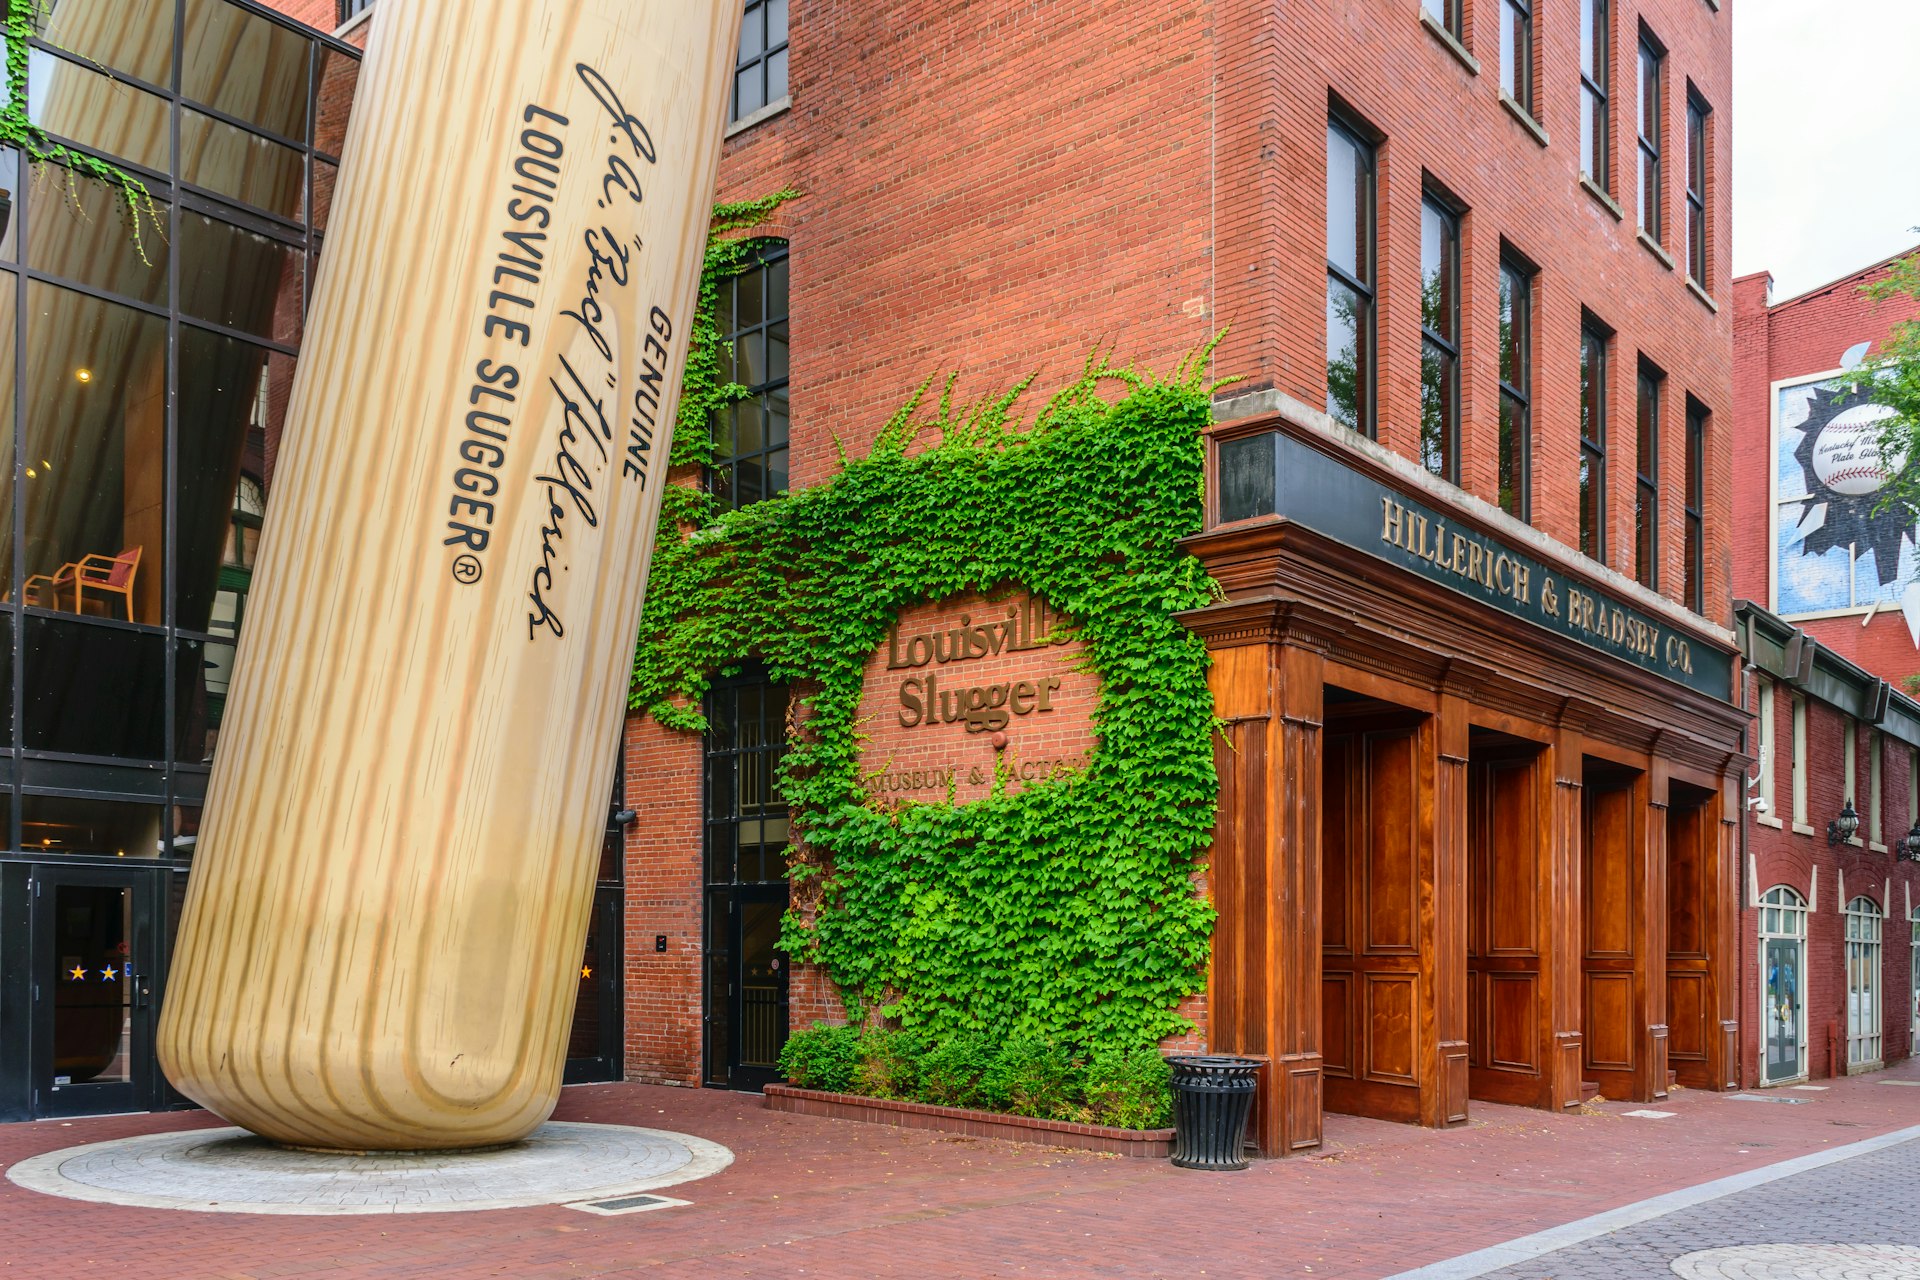 Exterior of the  Louisville Slugger Museum & Factory in downtown Louisville, Kentucky including a giant baseball bat propped up outside